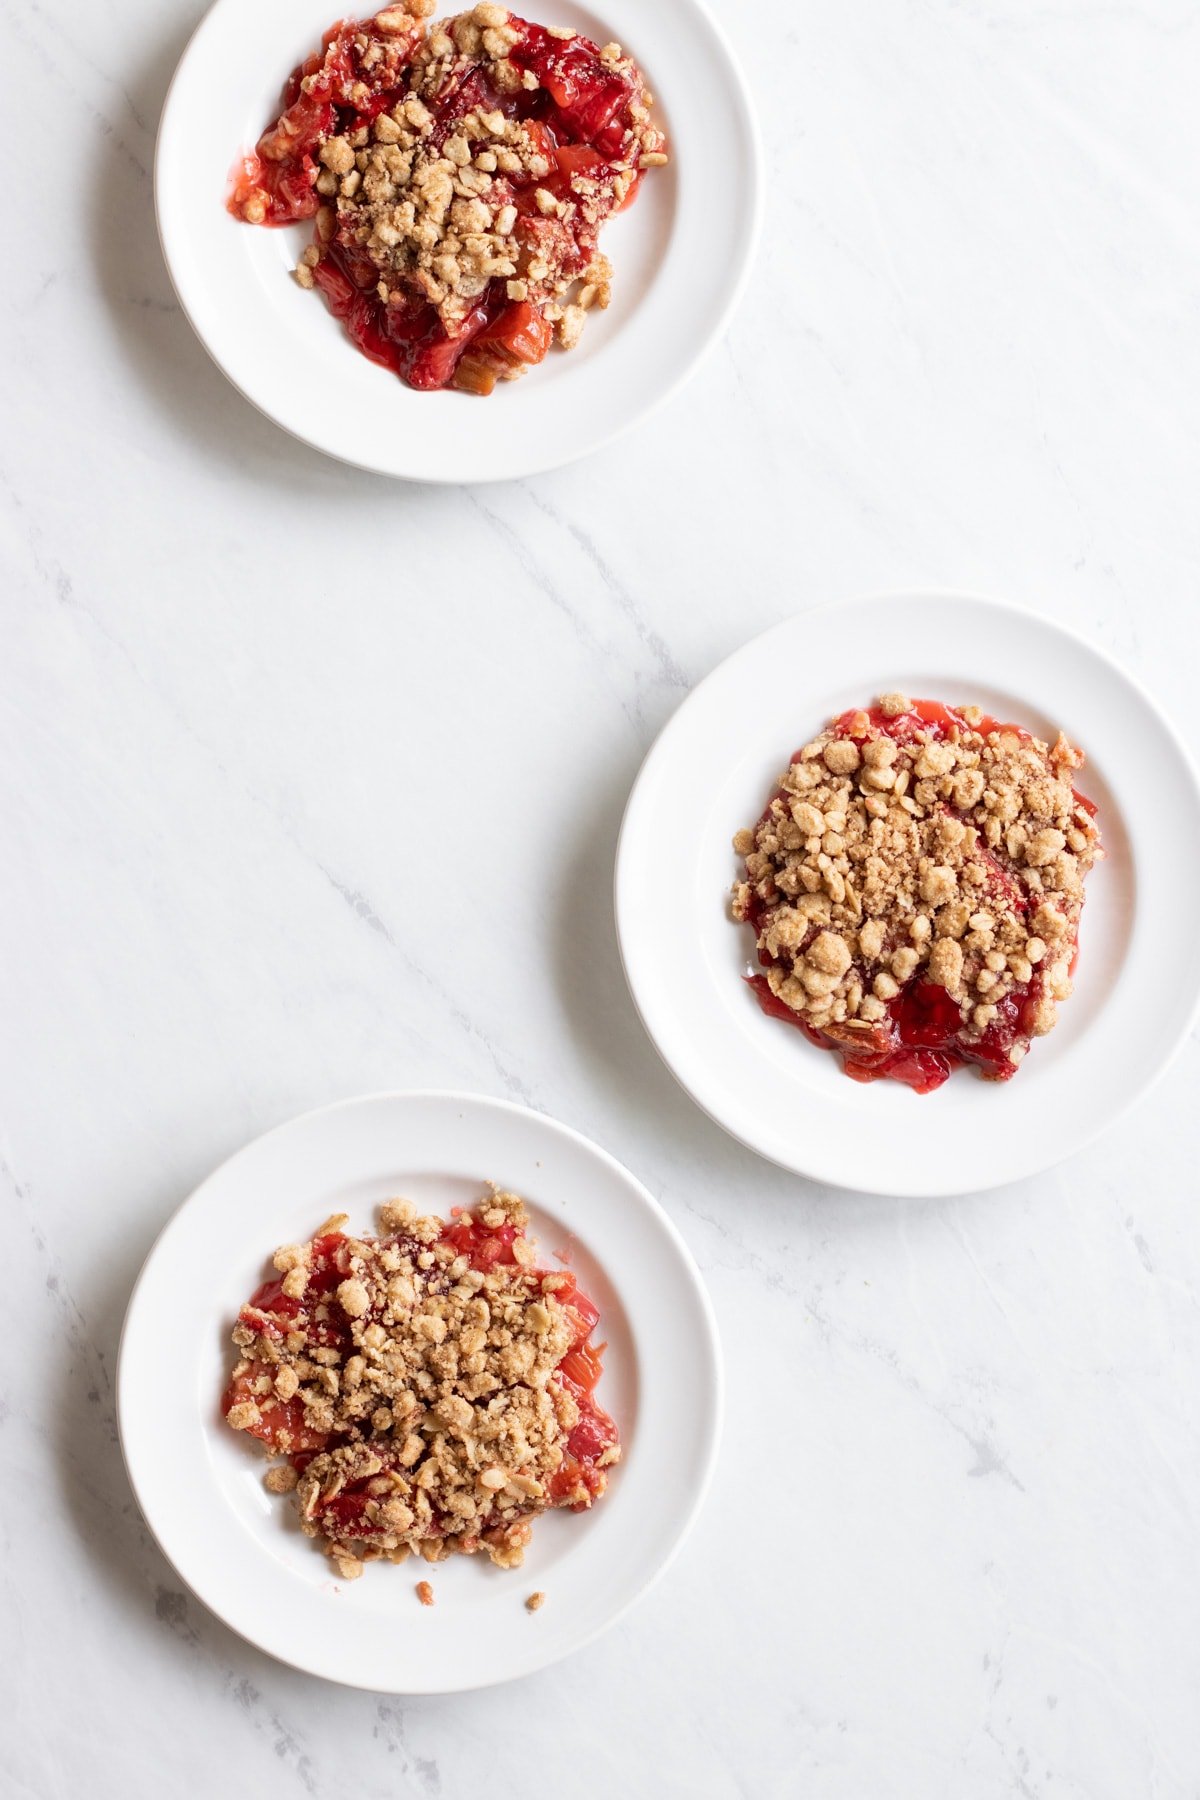 Three small white plates, each with a serving of low FODMAP strawberry rhubarb crumble.